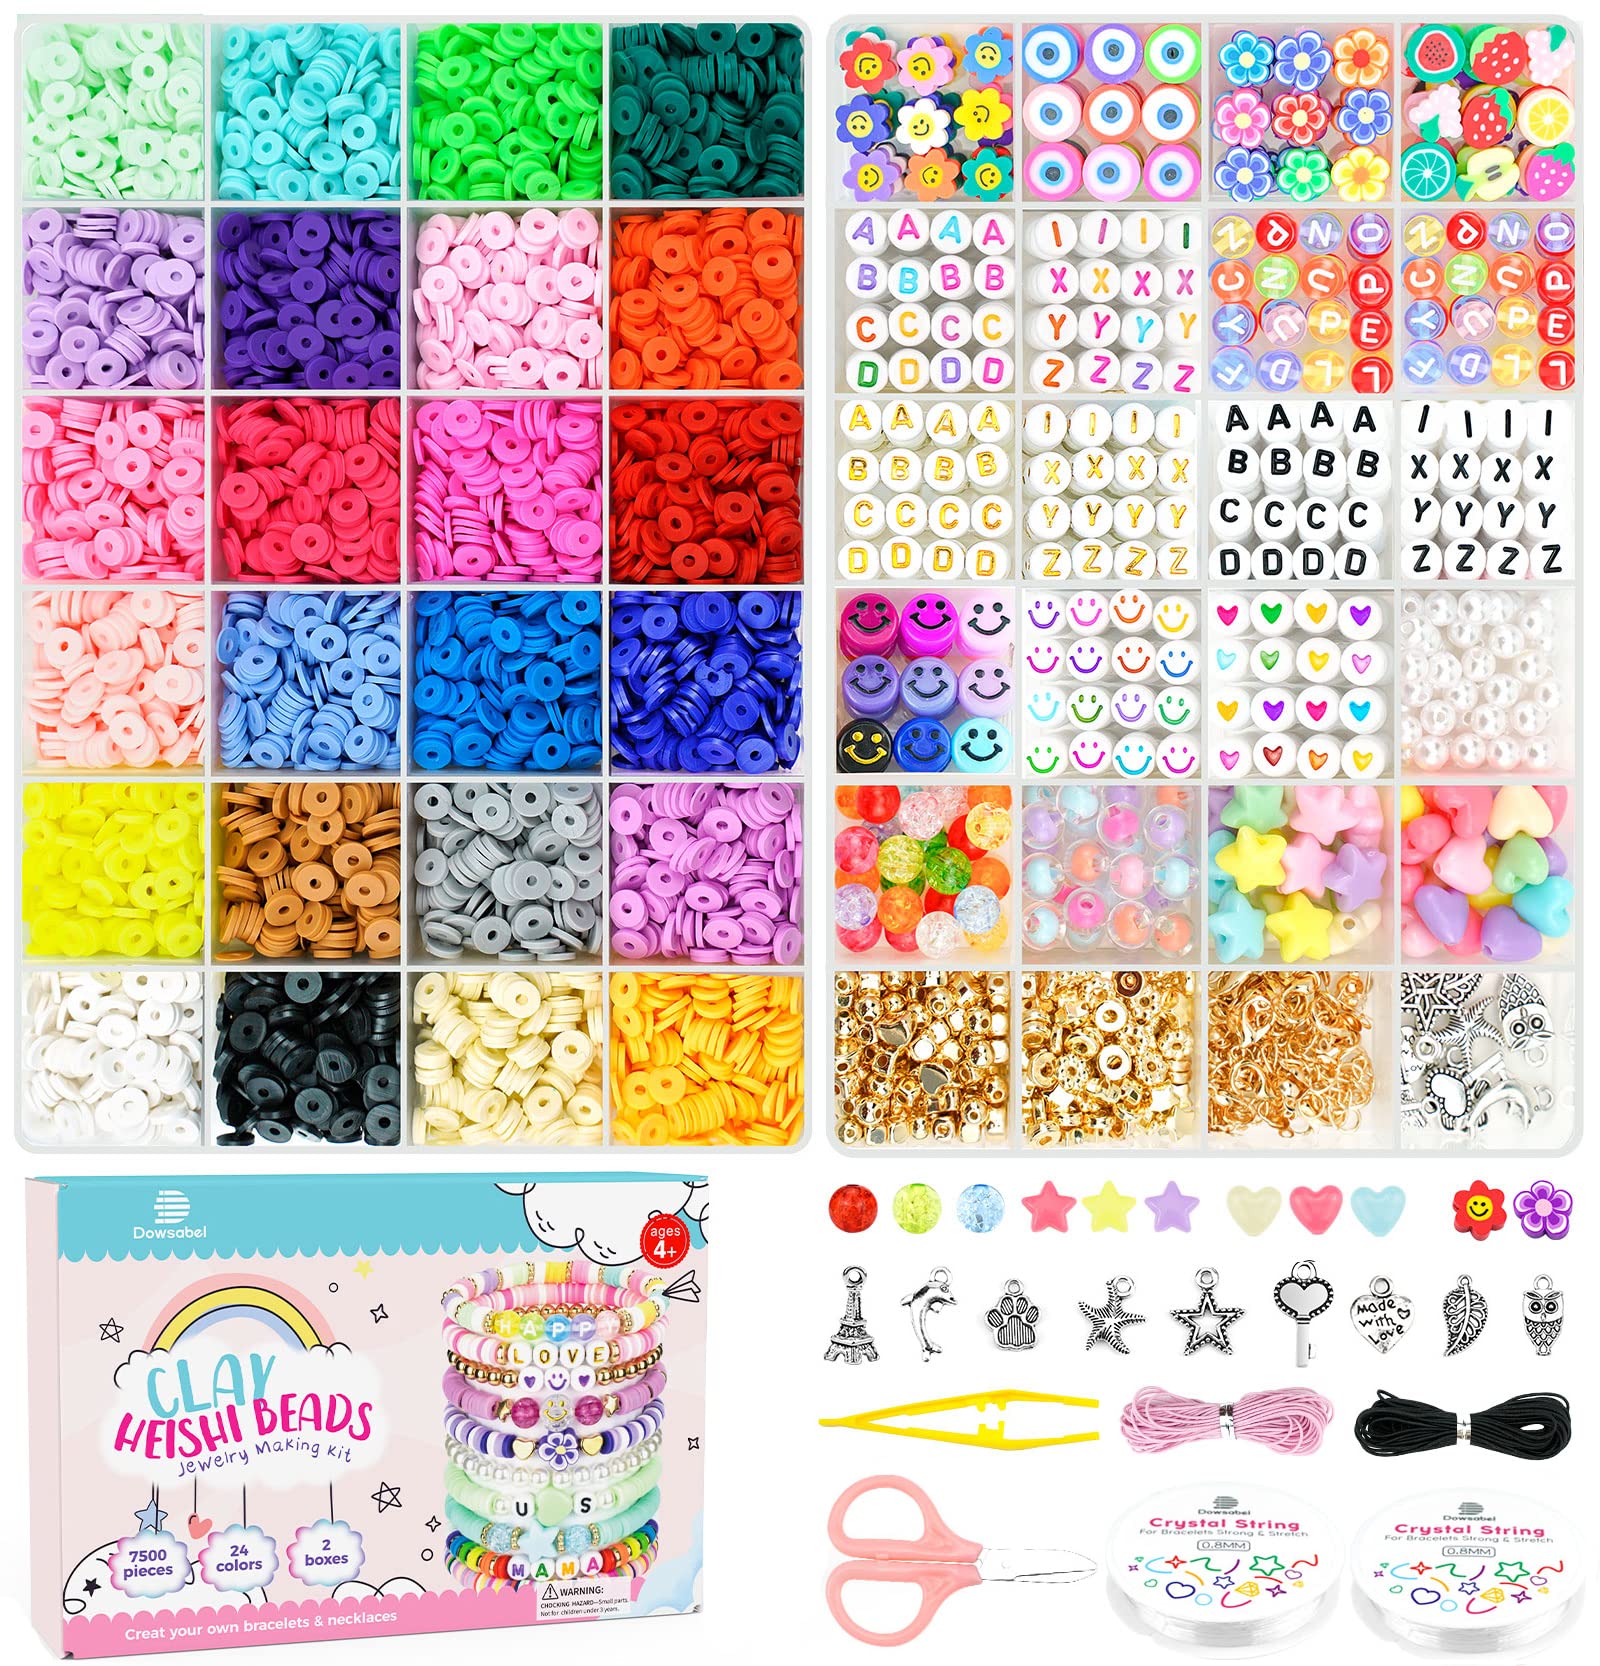 Clay Beads Bracelet Making Kit, 36 Colors Beads for Bracelets Making,  7849Pcs Polymer Clay Beads Friendship Bracelets Kit with Letter Beads, DIY